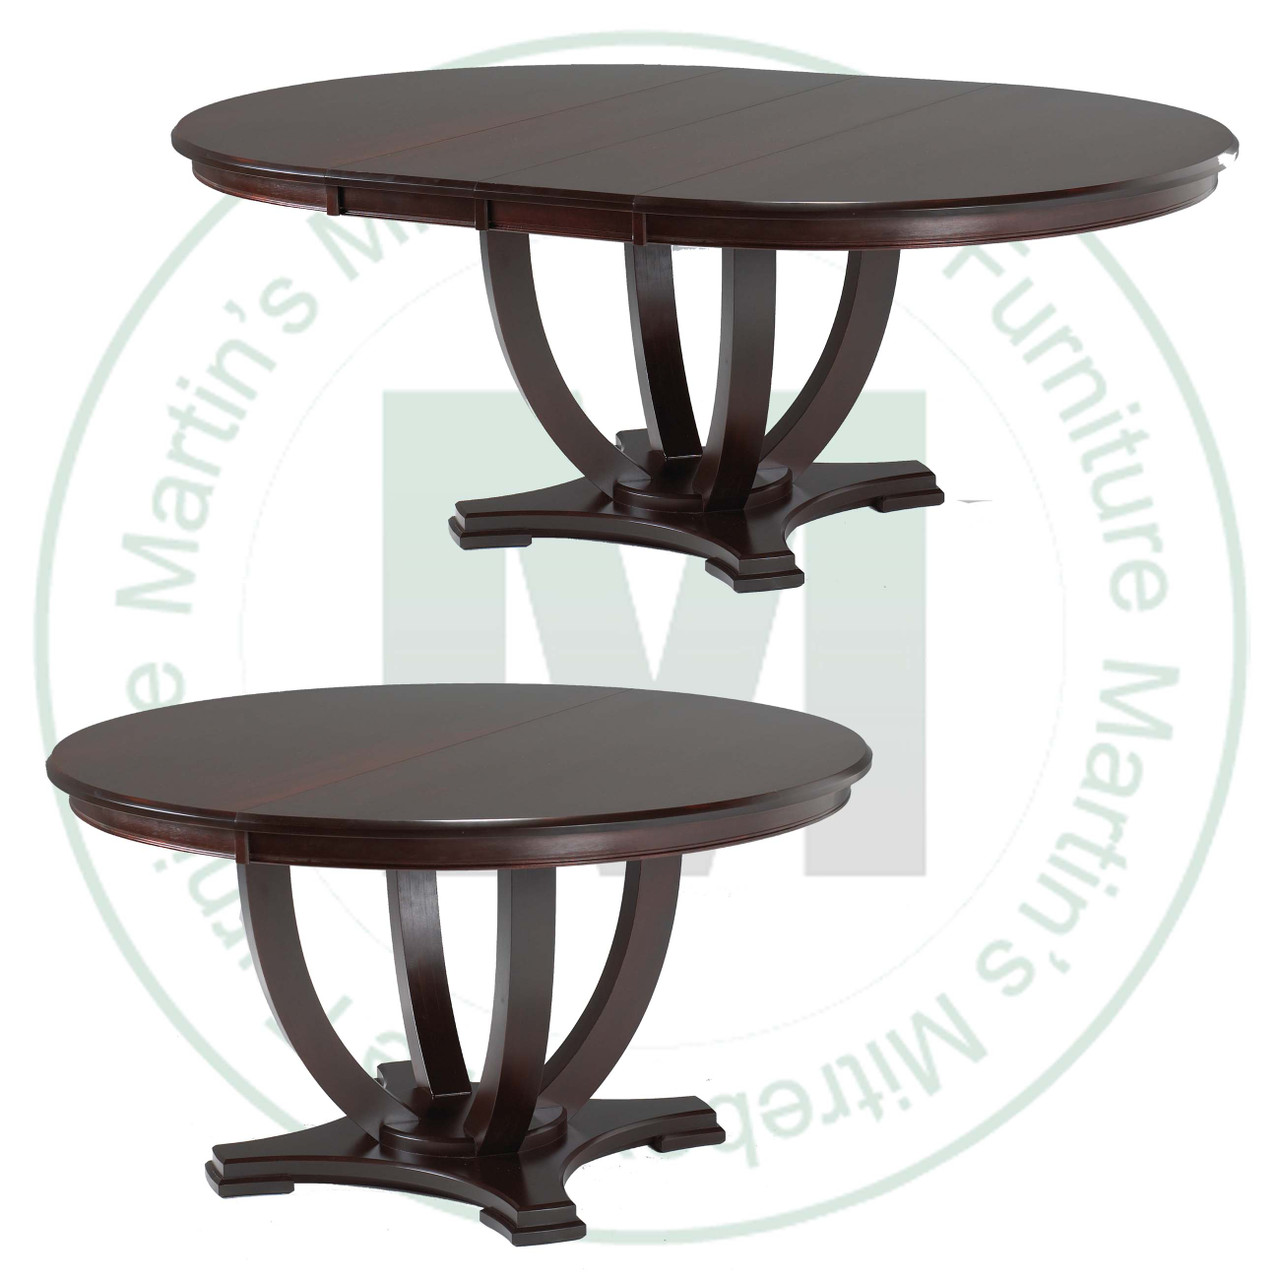 Wormy Maple Tuscany Single Pedestal Table 60''D x 60''W x 30''H With 2 - 12'' Leaves